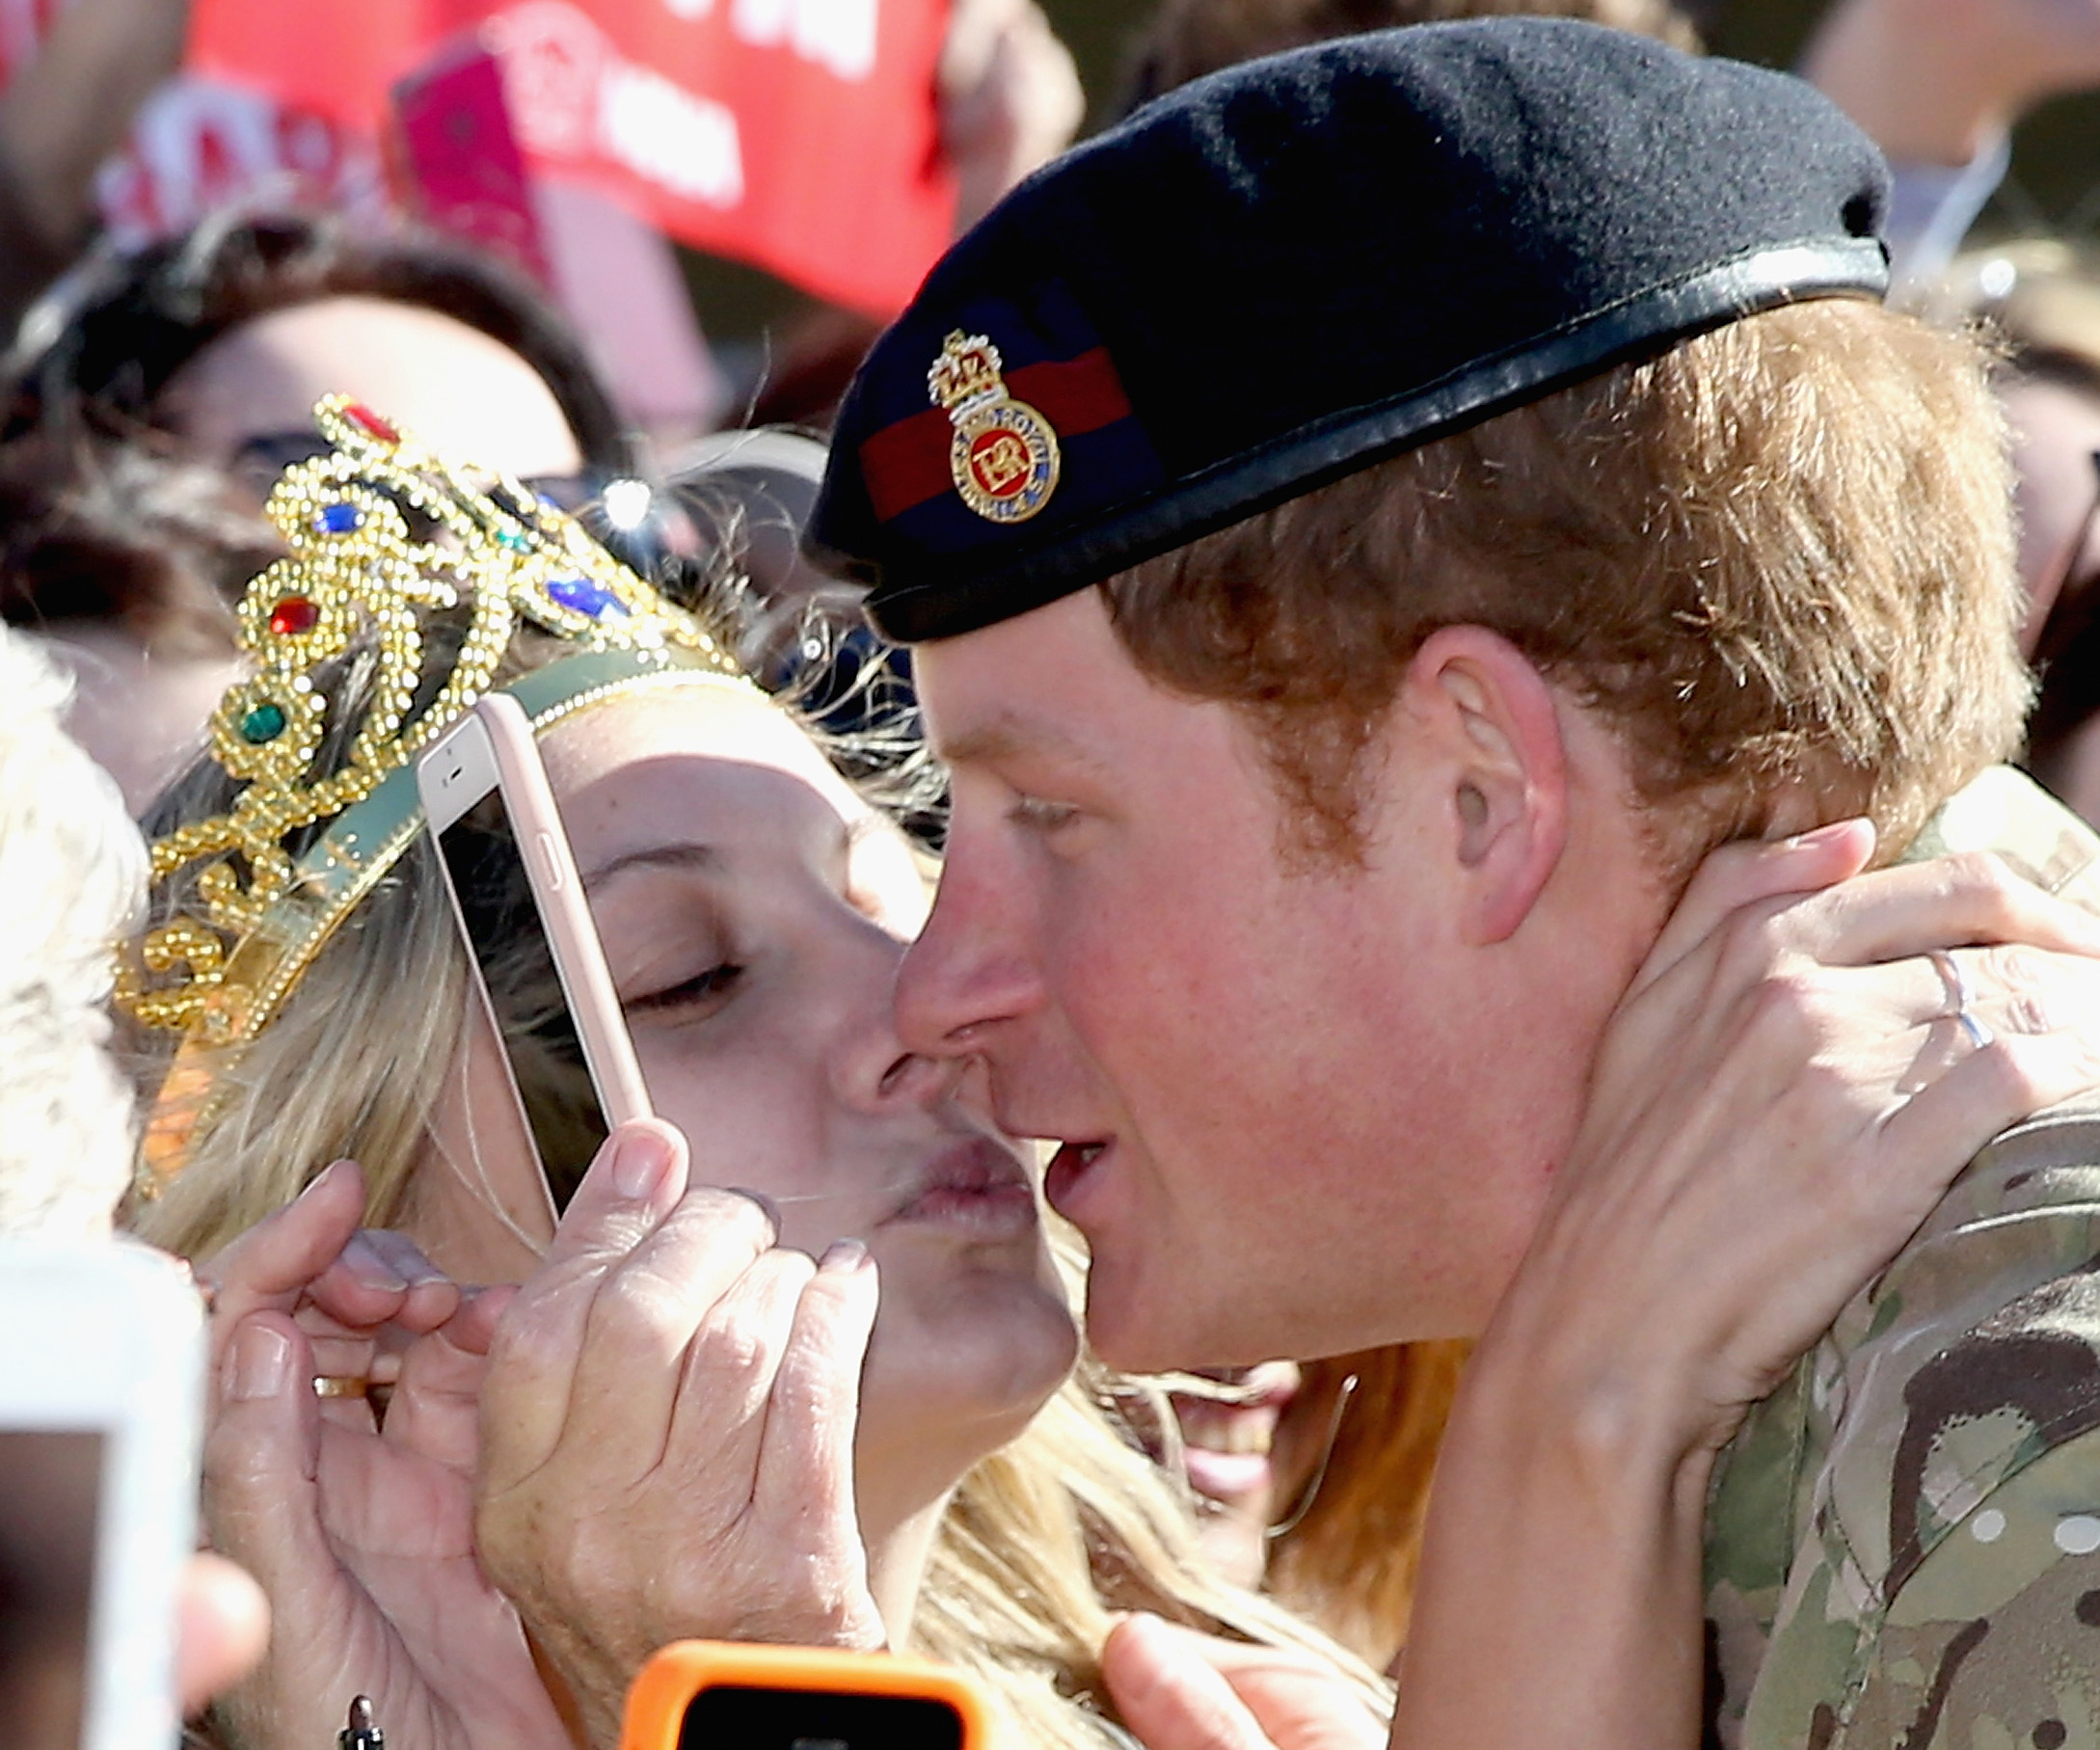 In for the kiss! Excited fans flock for Prince Harry